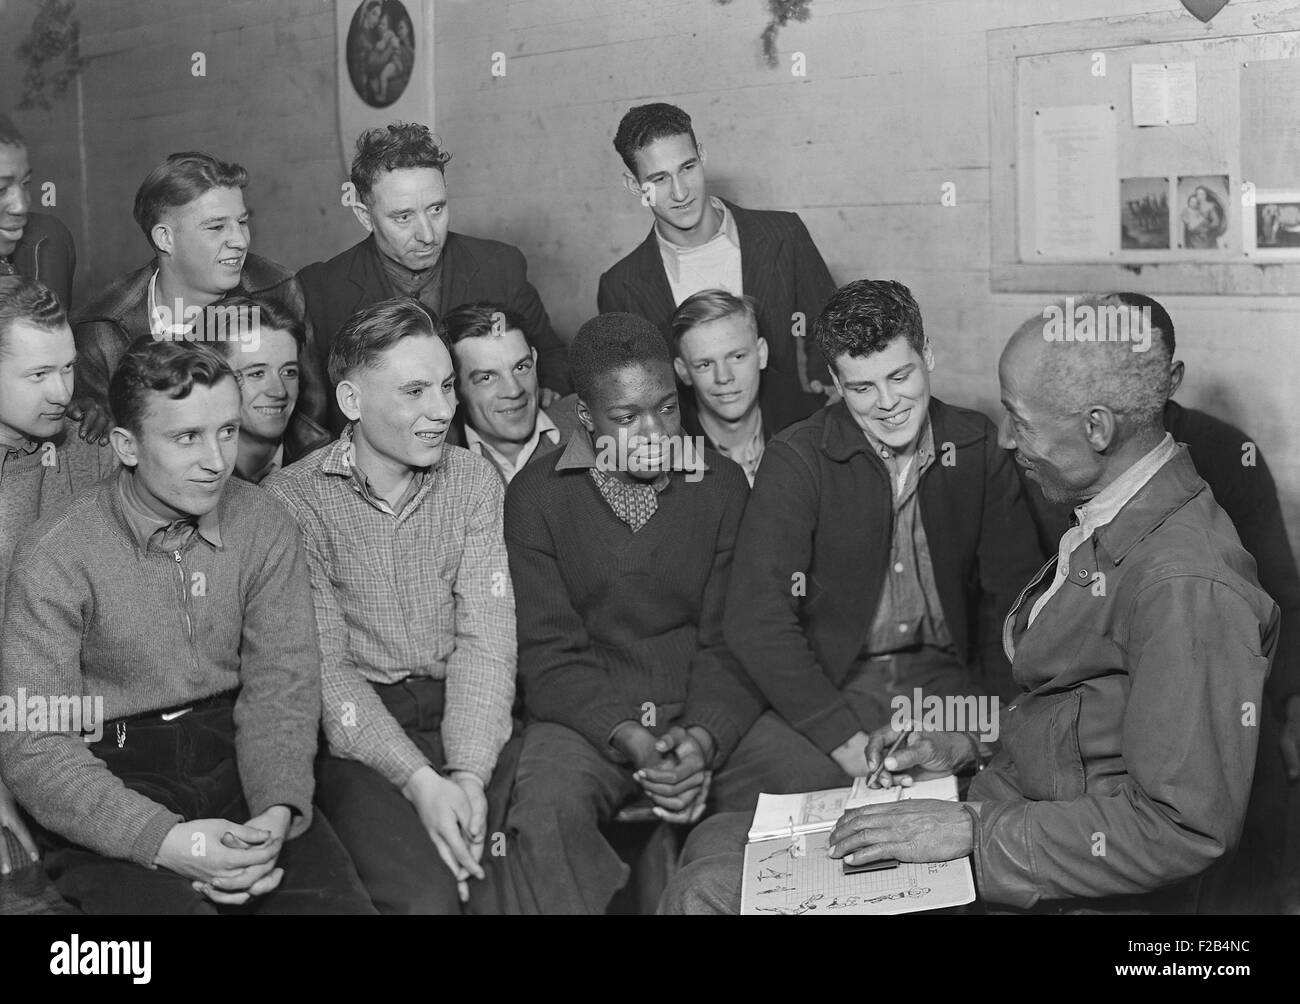 Unemployed men attending a meeting of the Workers' Alliance Council in 1936. Most are young second generation miners. The integrated group with an African American meeting leader are consistent with the leftist (Socialist and Communist) orientation of the Workers' Alliance Council. Photo by Lewis Hine. - (BSLOC 2015 1 173) Stock Photo